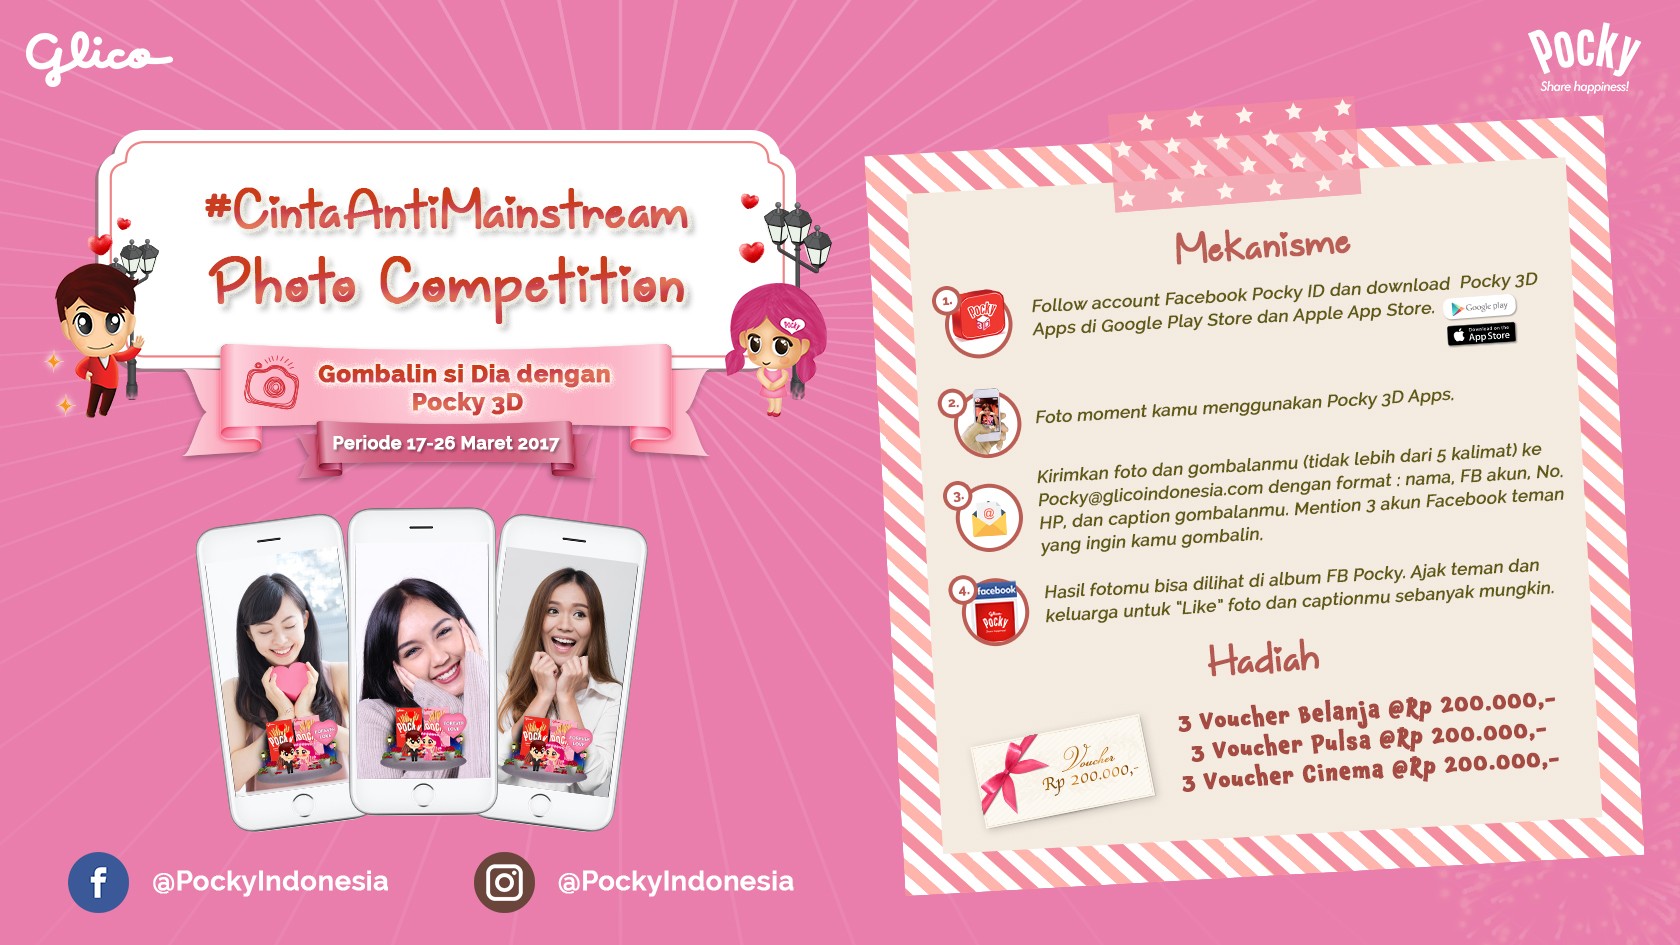 Pocky 3D Photo Competition